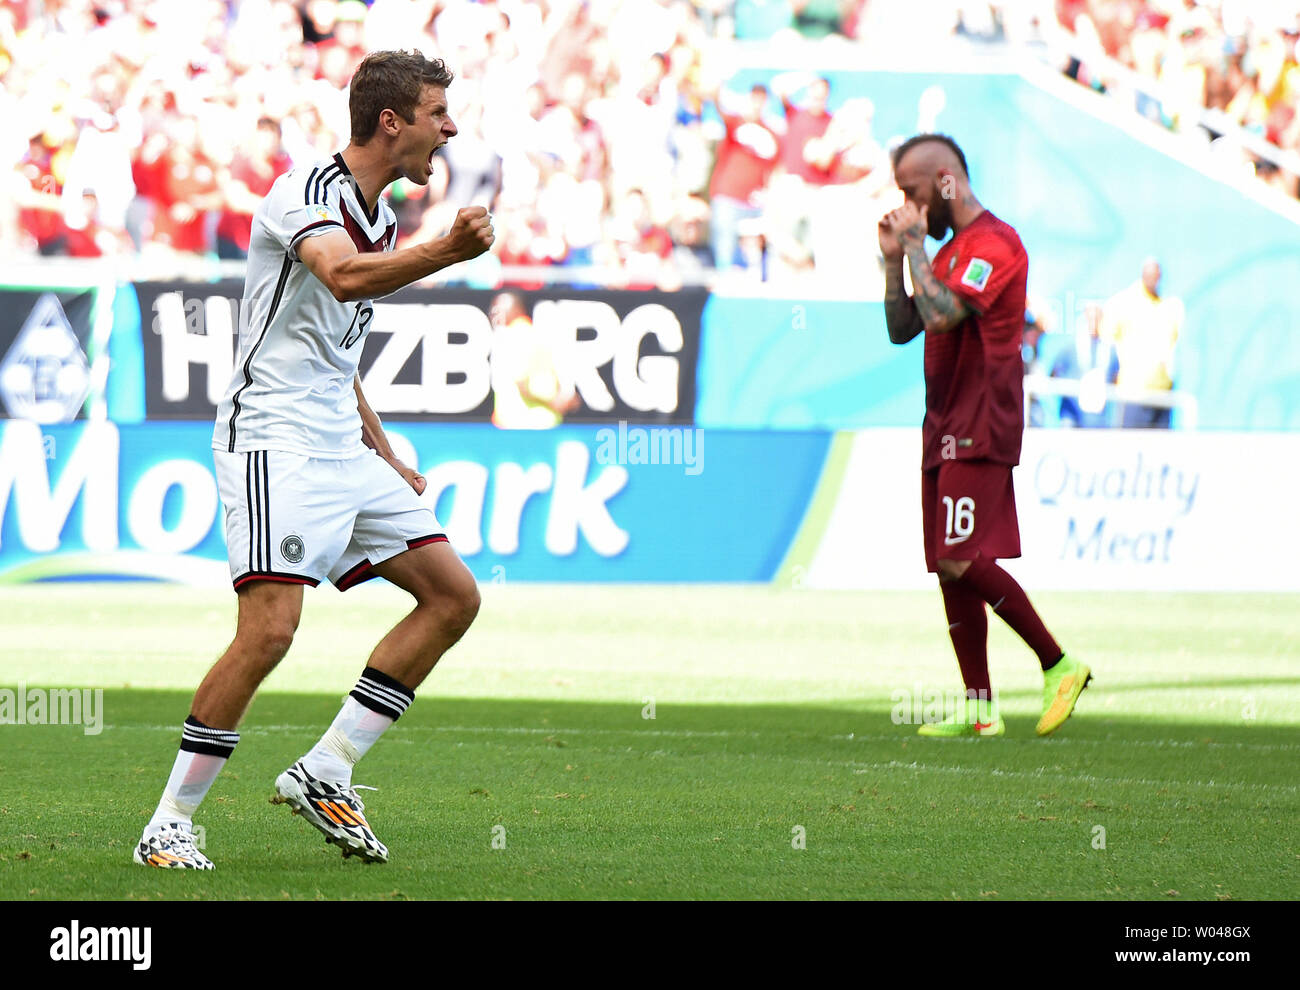 Thomas Muller of Germany celebrates scoring during the 2014 FIFA World Cup Group G match at the Arena Fonte Nova in Salvador, Brazil on June 16, 2014. UPI/Chris Brunskill Stock Photo